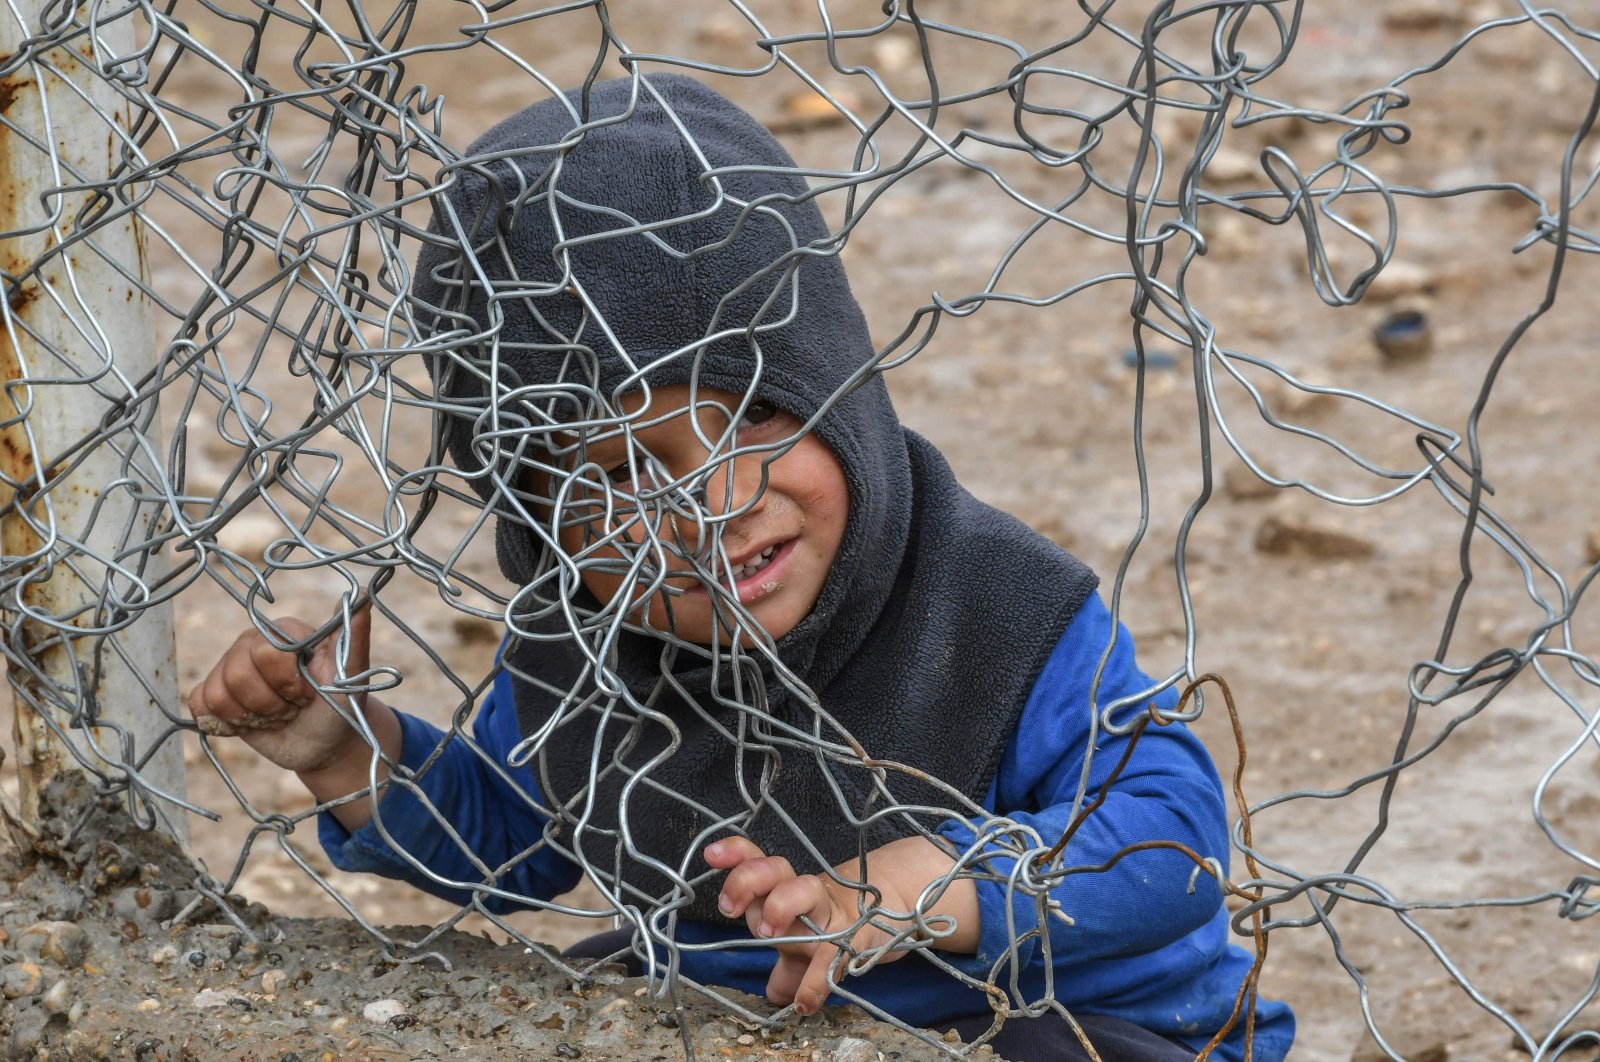 A child sits behind a wire fence in al-Hol camp run by the YPG/PKK terrorist organization, al-Hasakeh, Syria, March 28, 2019. (AFP Photo)